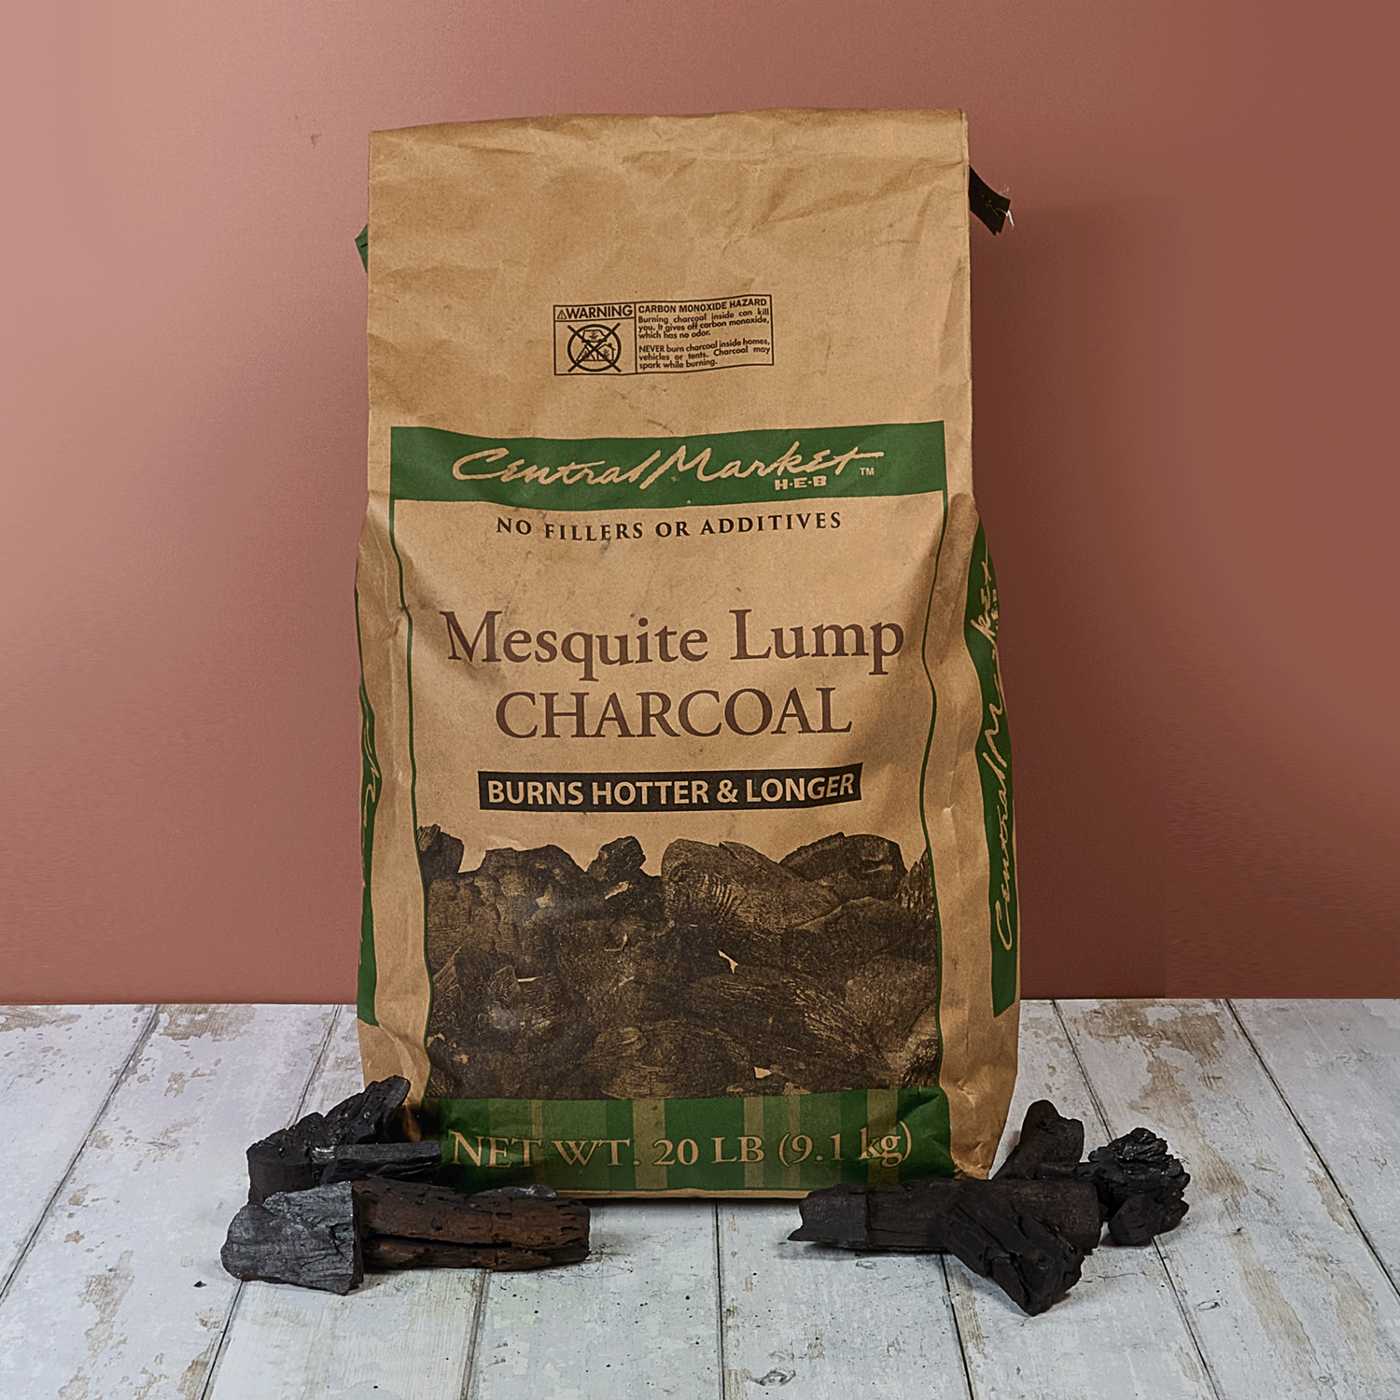 Central Market Mesquite Lump Charcoal; image 2 of 2